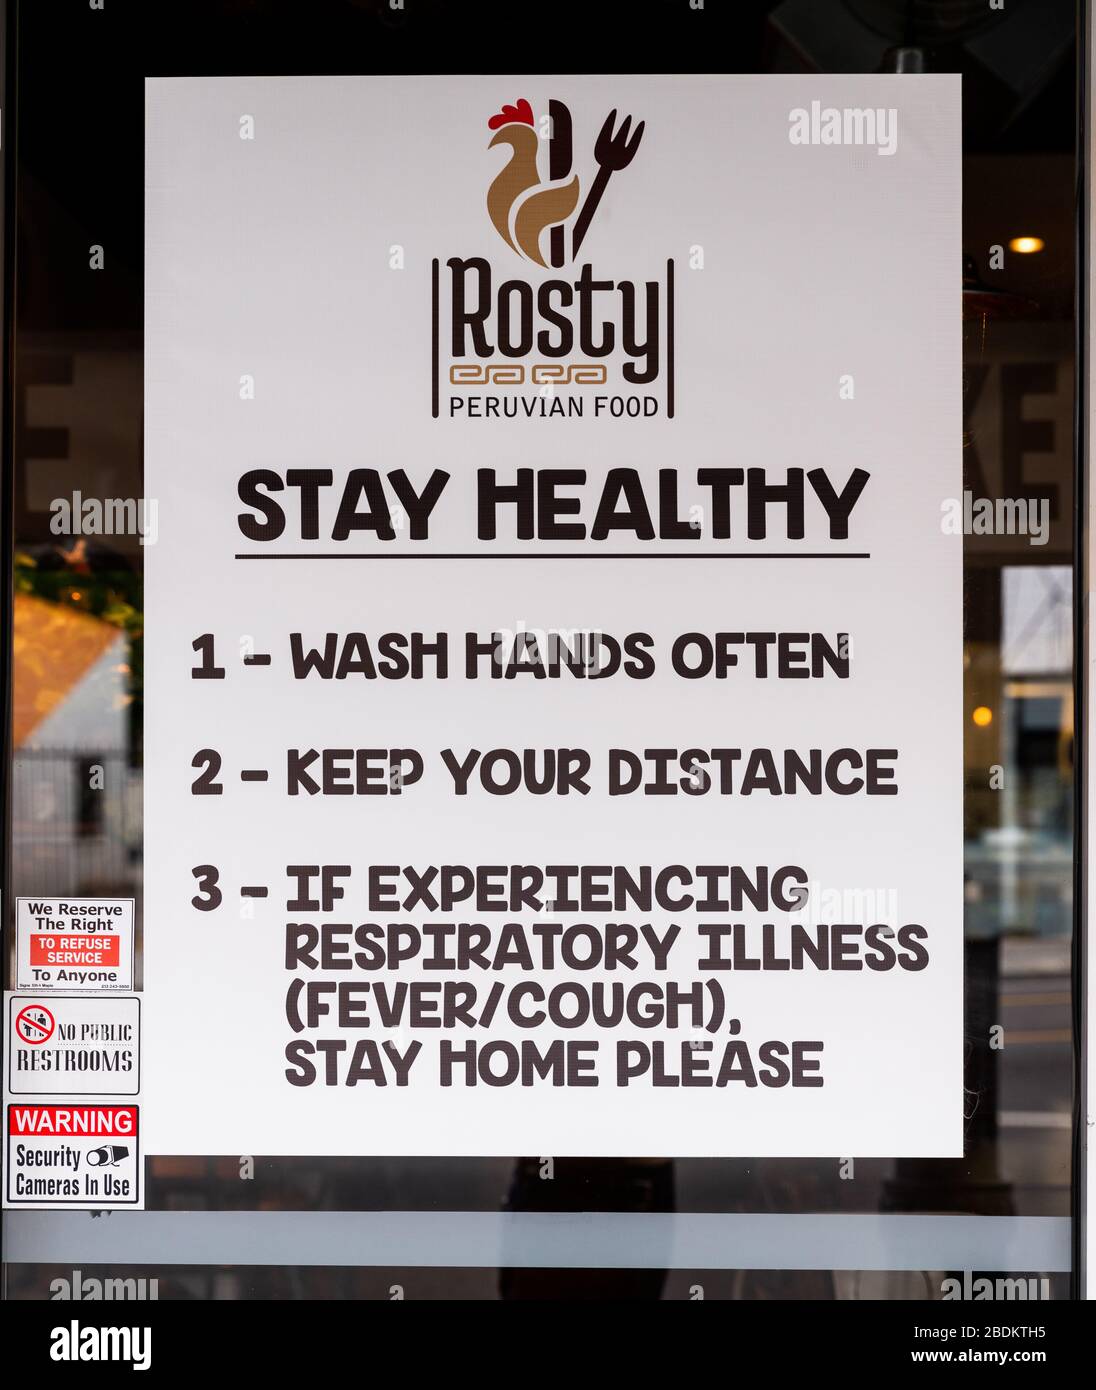 Sign in restaurant window during Covid-19 outbreak. It reads: stay healthy, wash hands often, keep your distance, if experiencing illness, stay home. Stock Photo